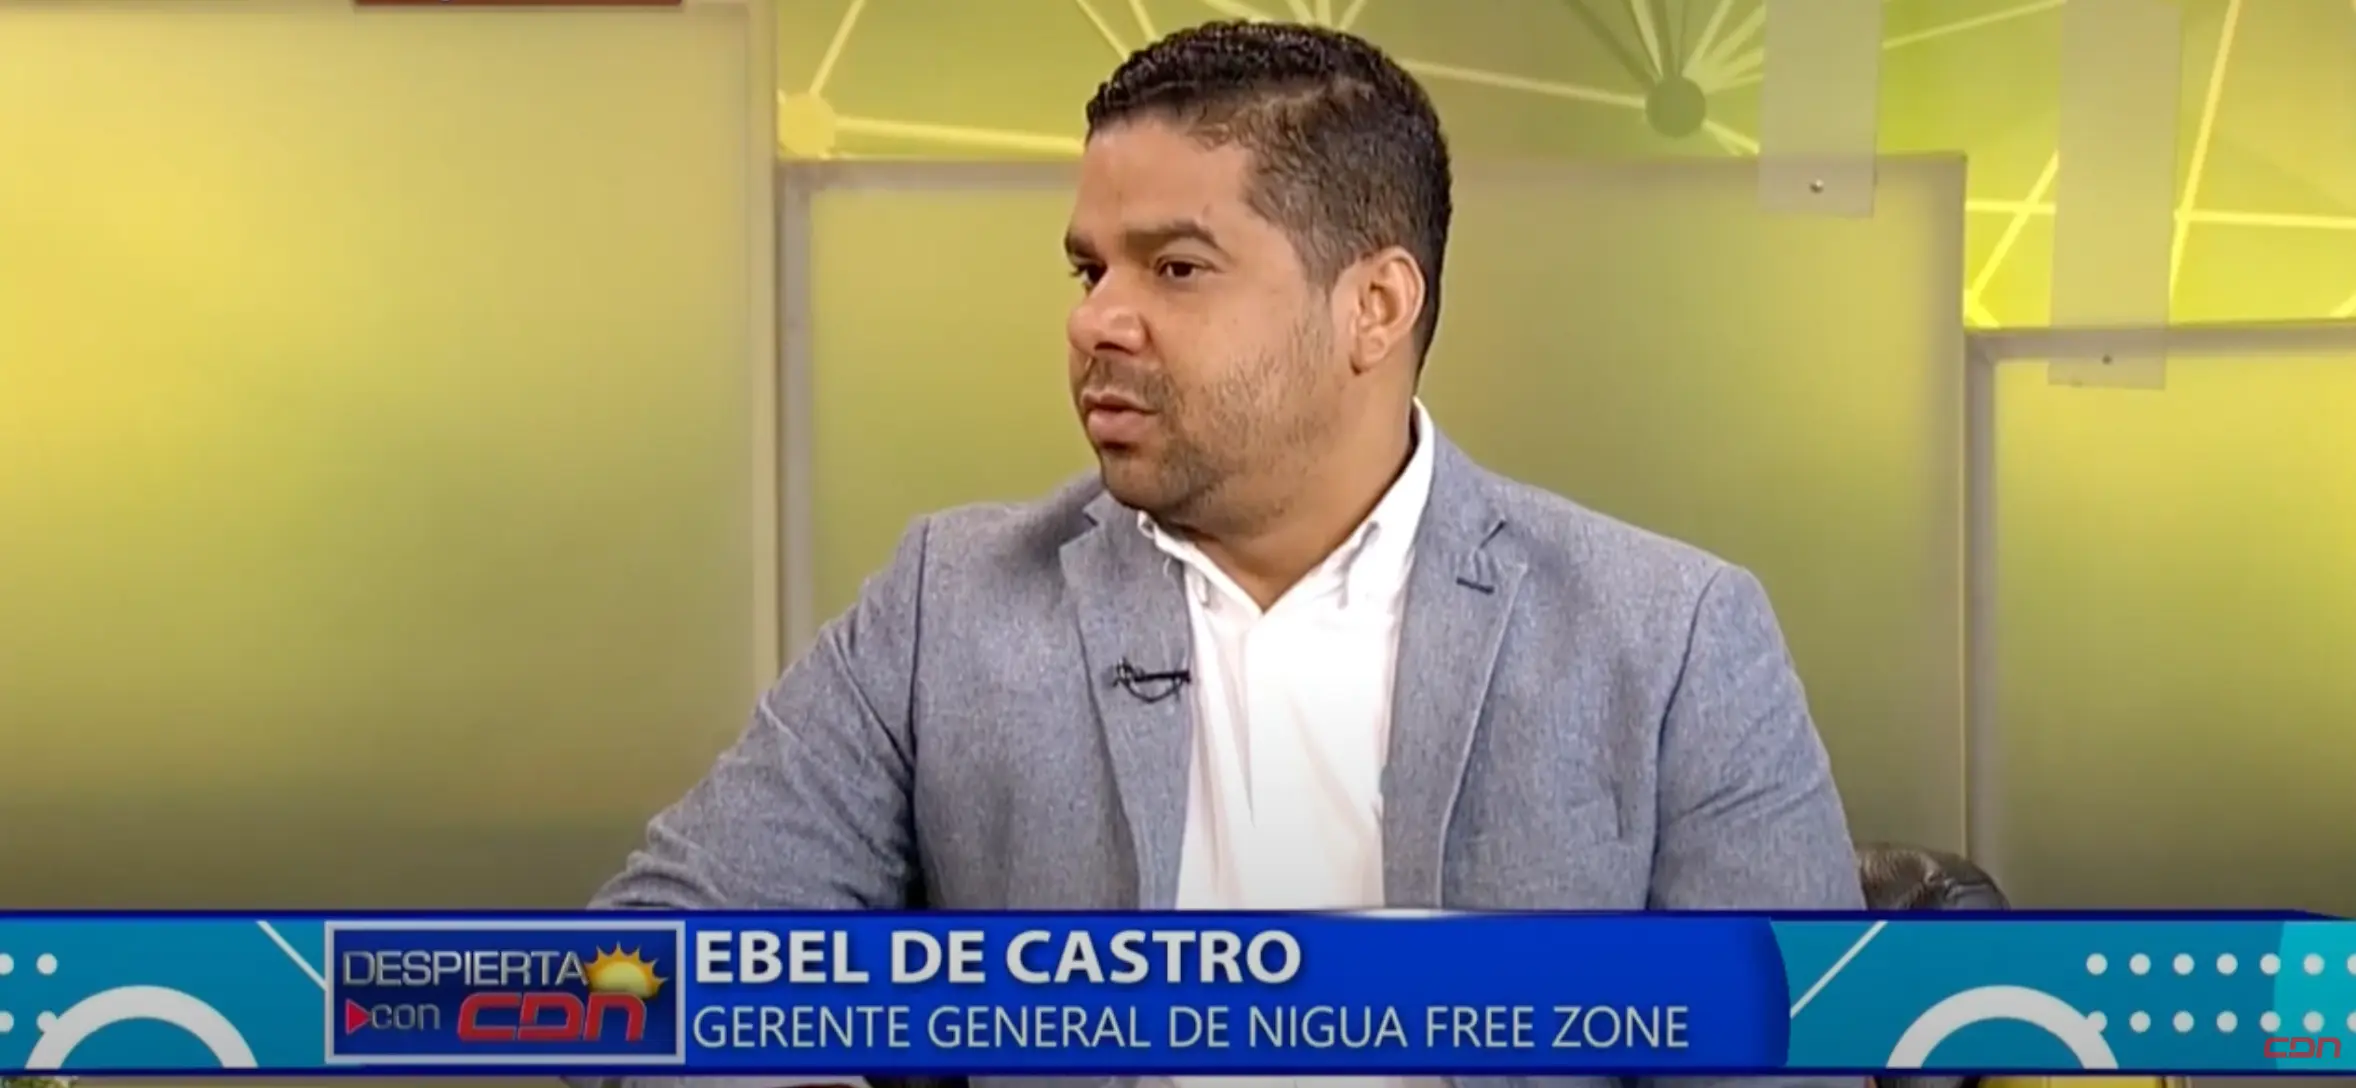 Interview with Ebel de Castro, General Manager of Nigua Free Zone